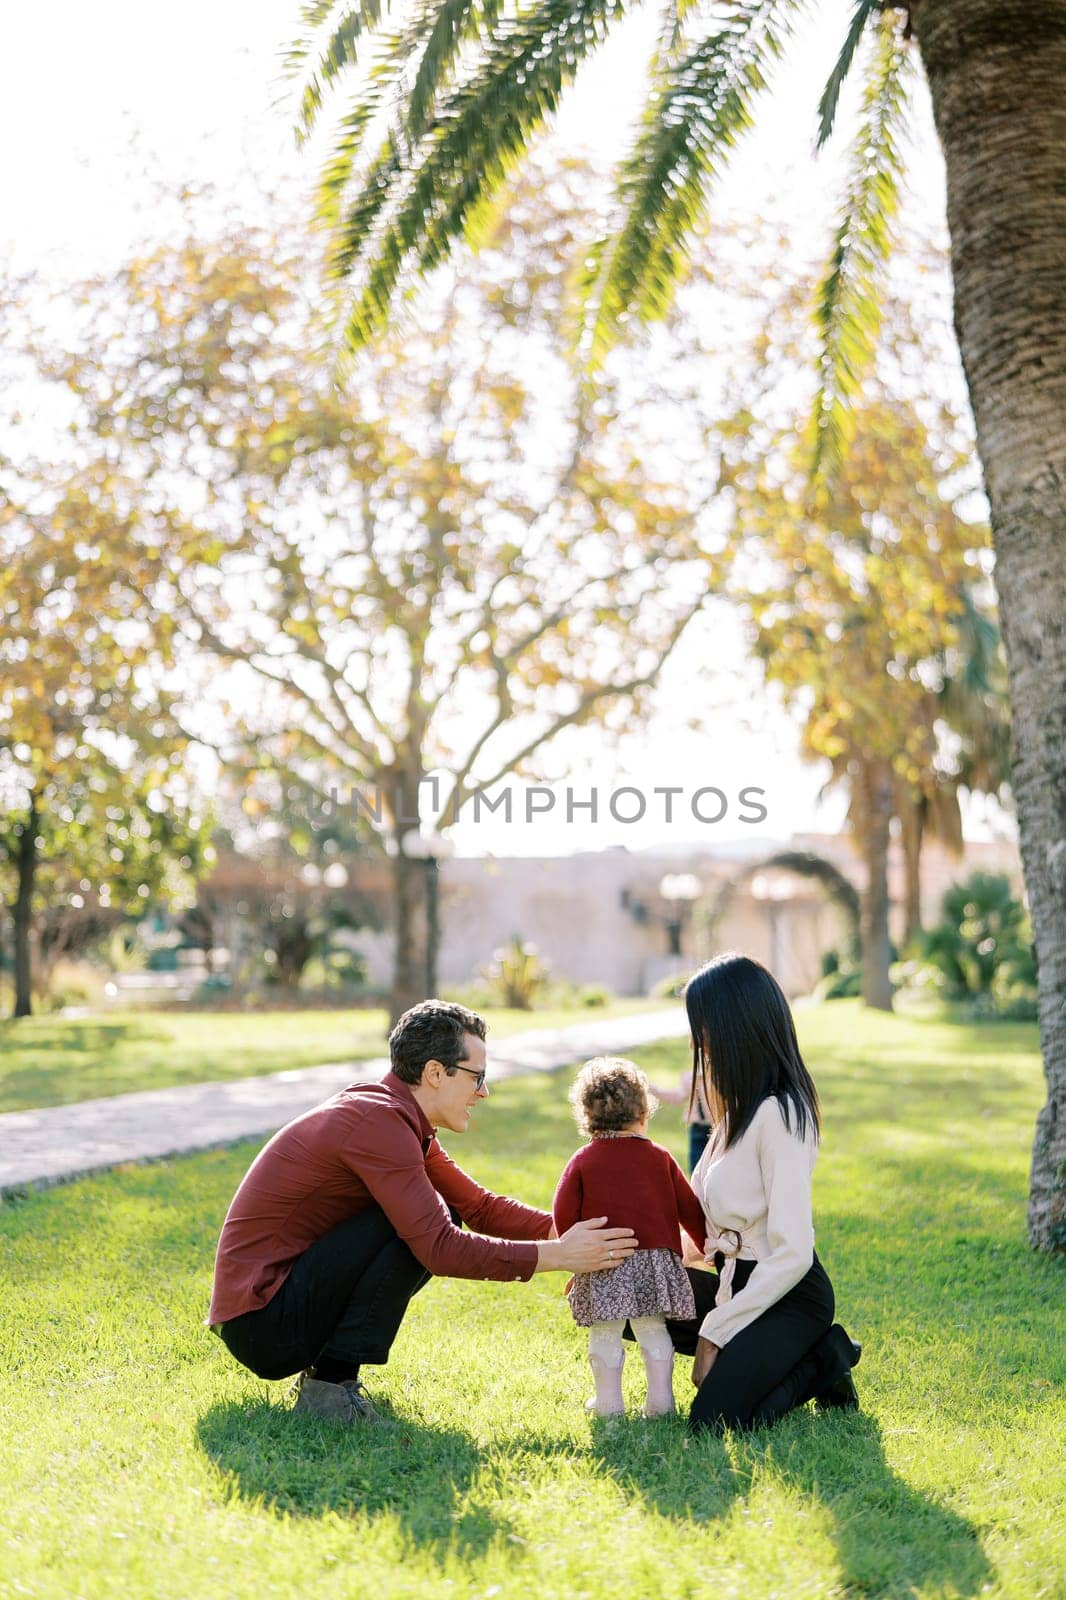 Dad hugs a little girl squatting next to mom in the park. Back view. High quality photo